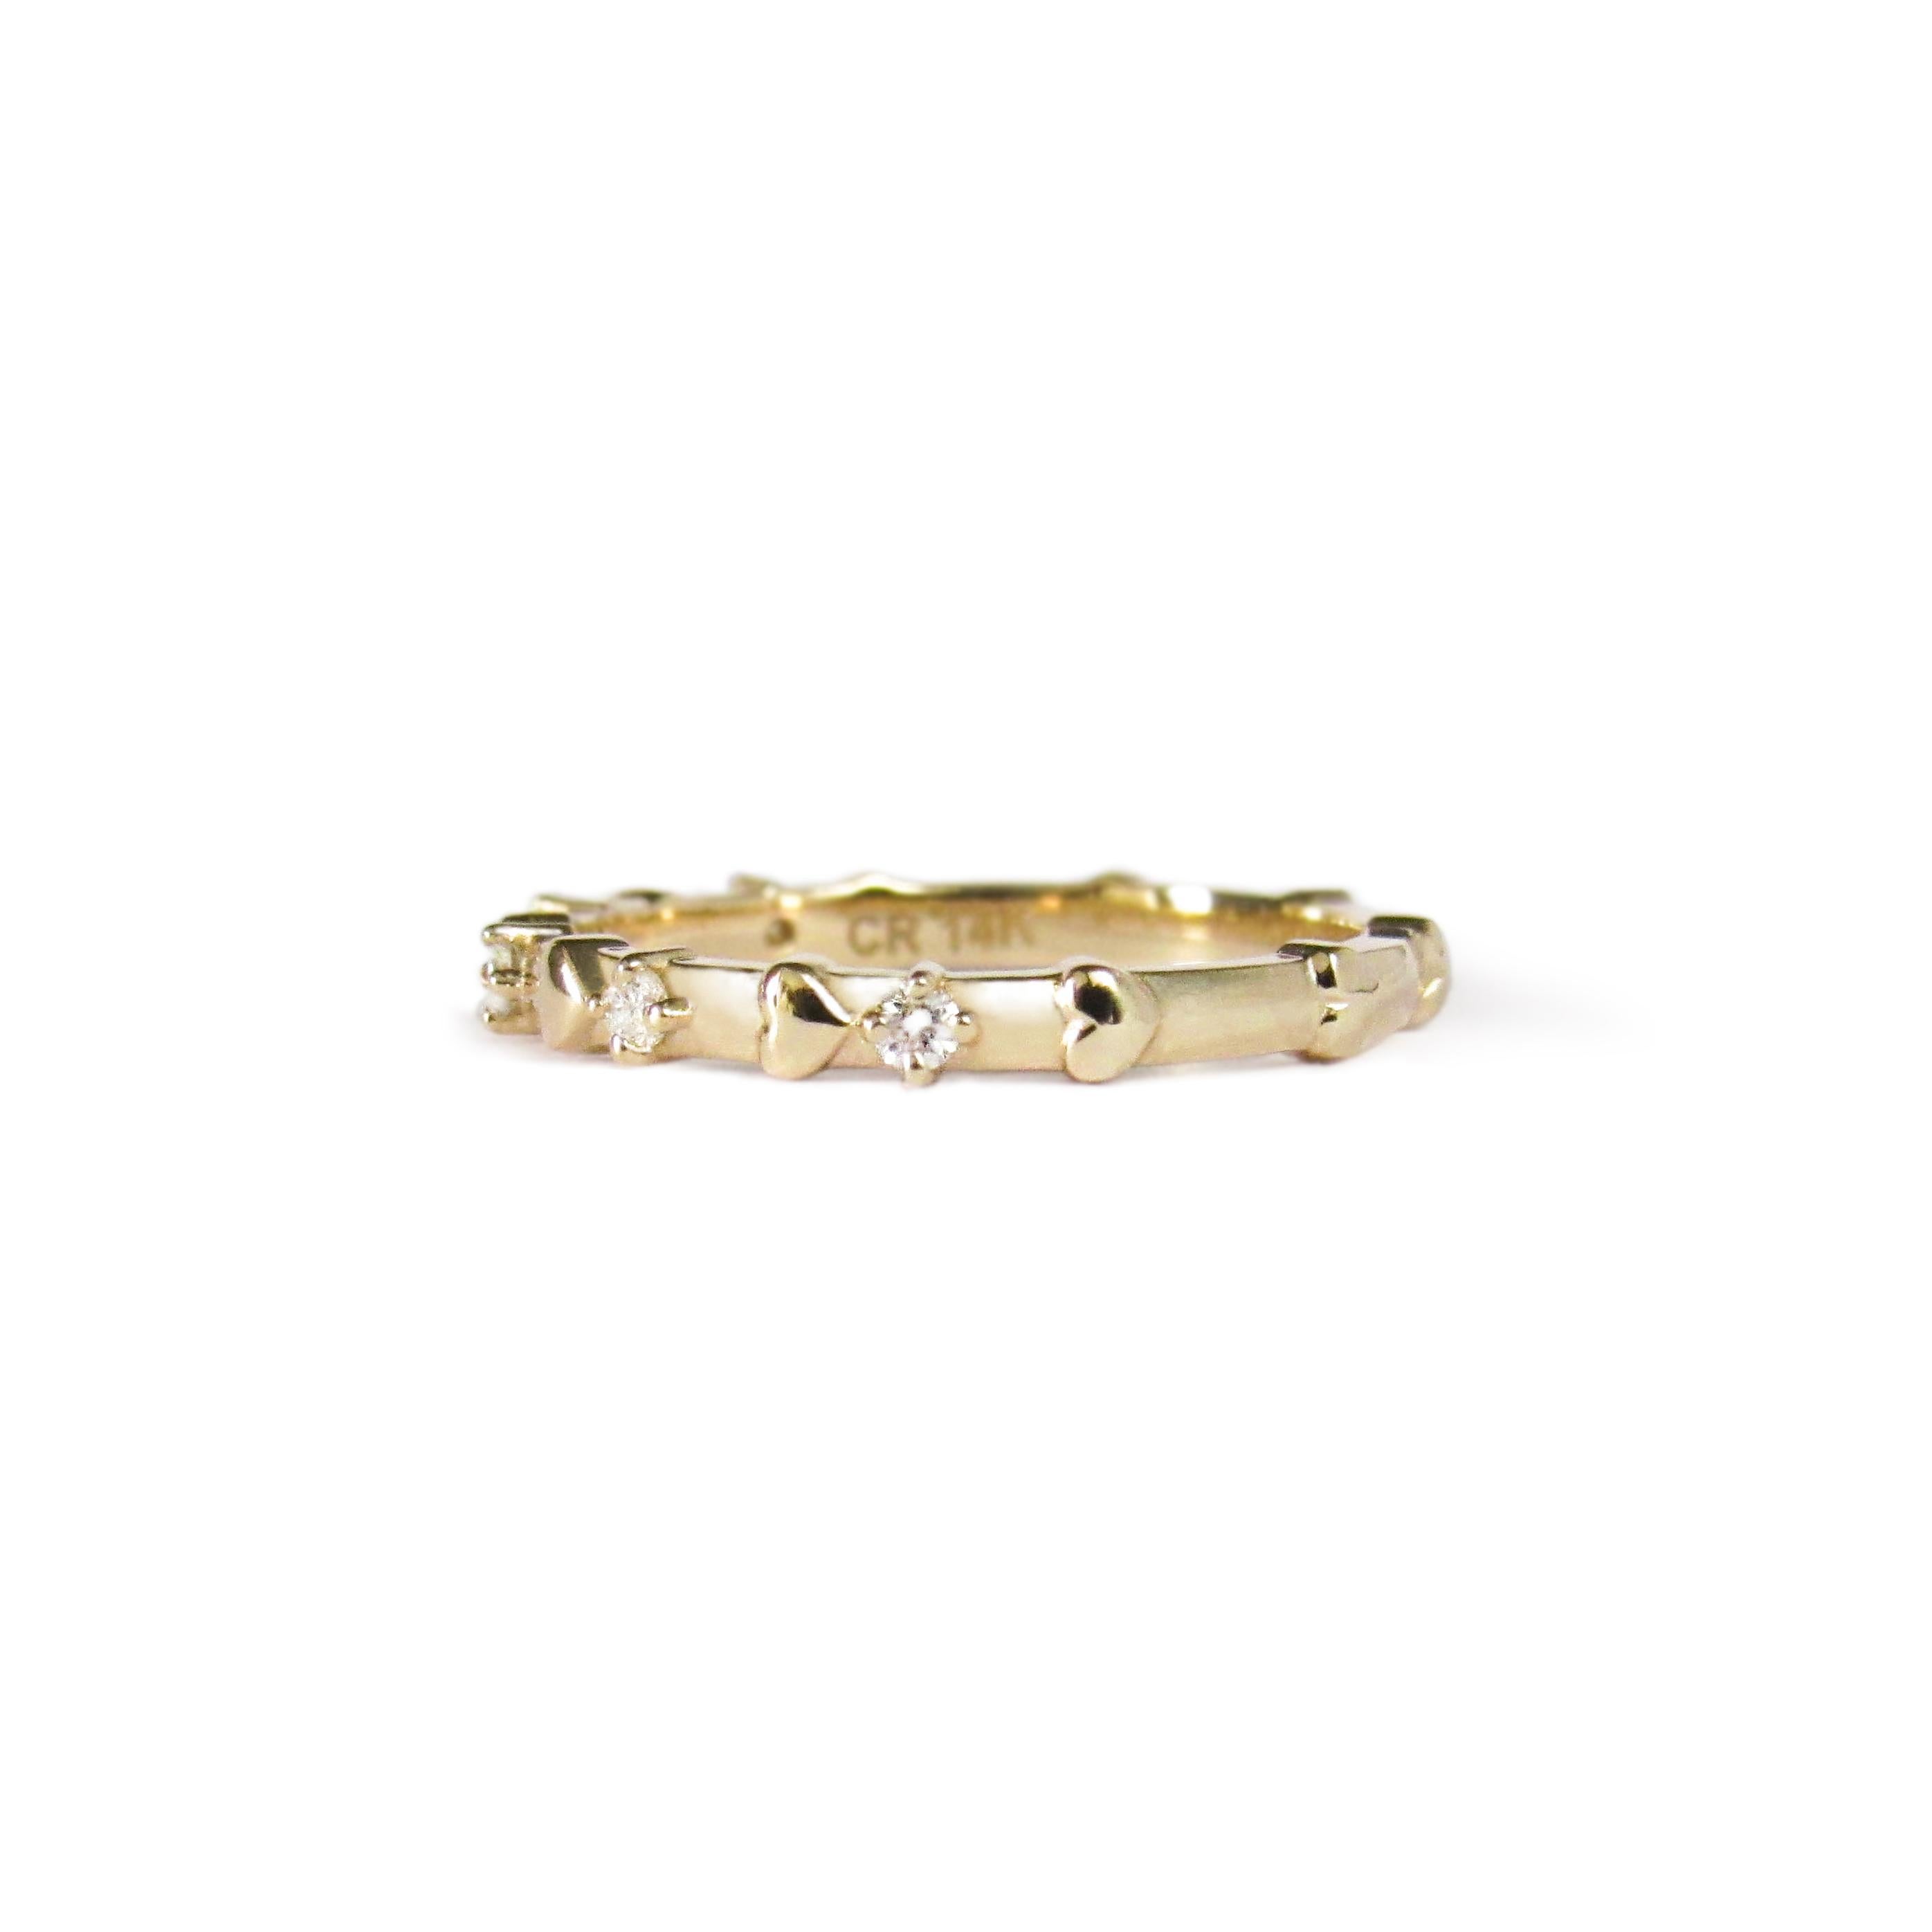 MADE TO ORDER *Please note that we take 20 business days to create your jewel before its ready to ship. Be sure to specify your ring size number.

This 14 karat yellow gold ring is special because you can wear it in two different ways. This lovely